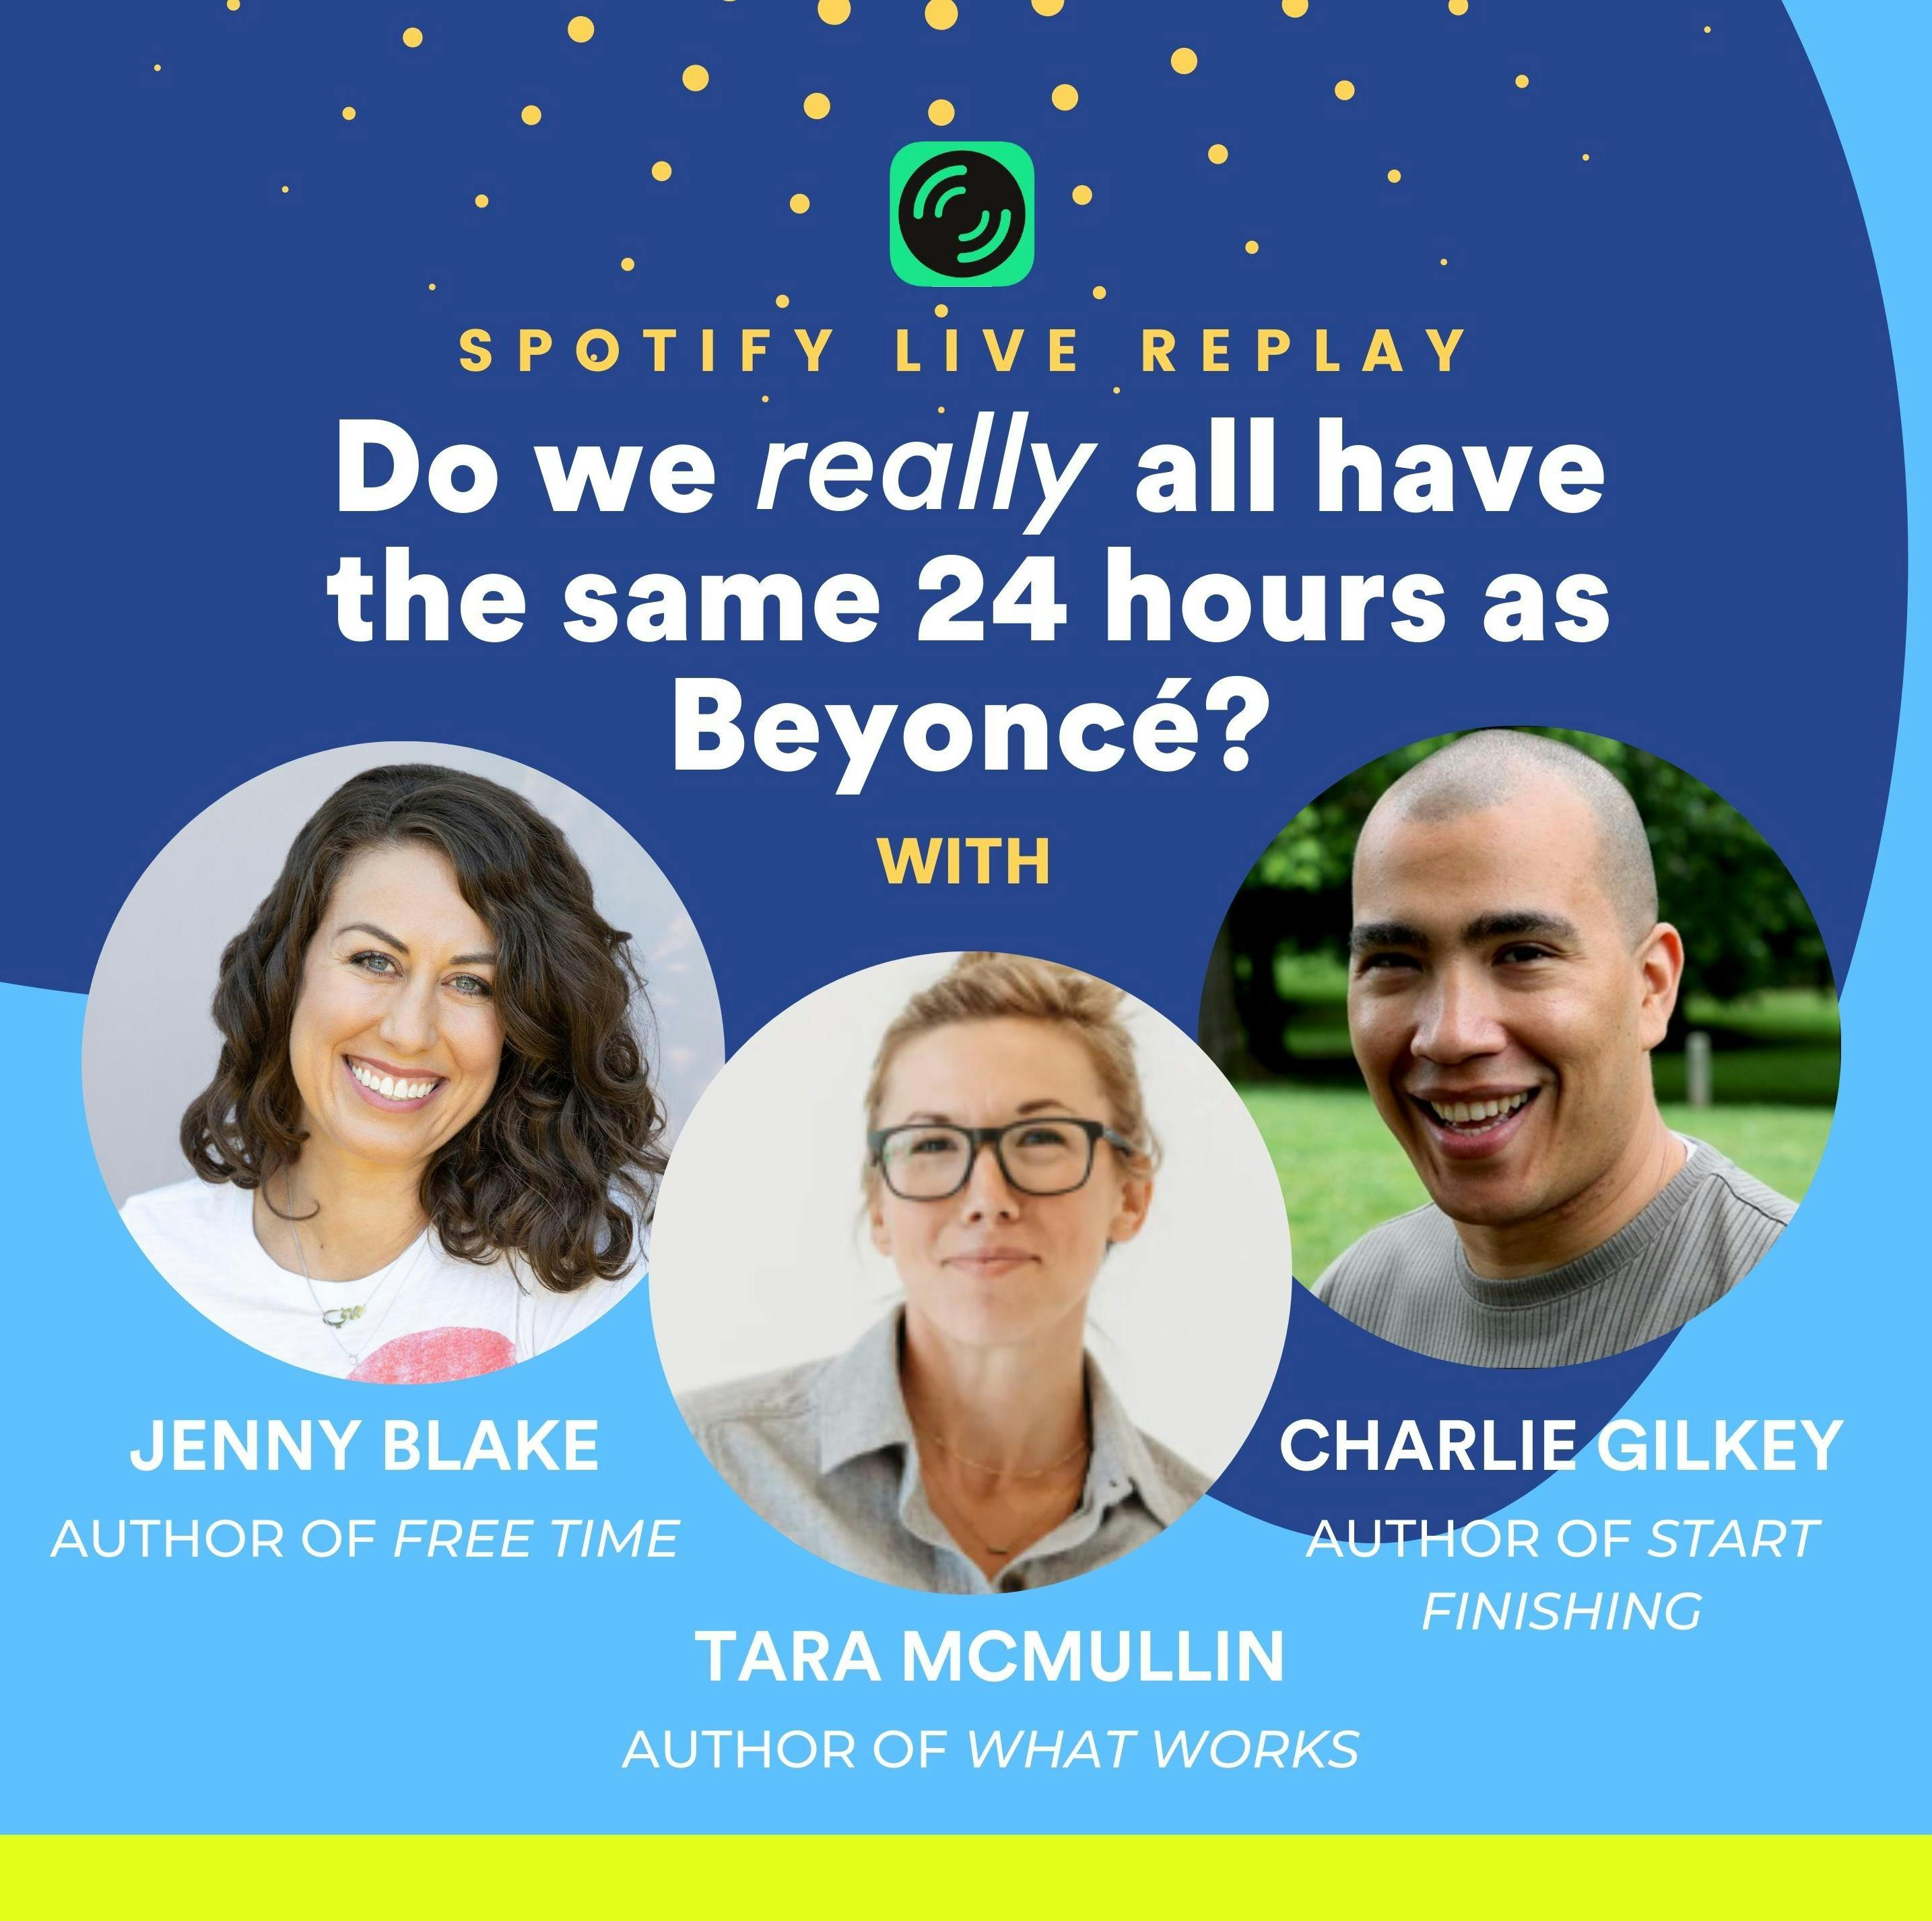 143: Exploring Time, Money, and Energy Capacity with Tara McMullin and Charlie Gilkey (Replay)